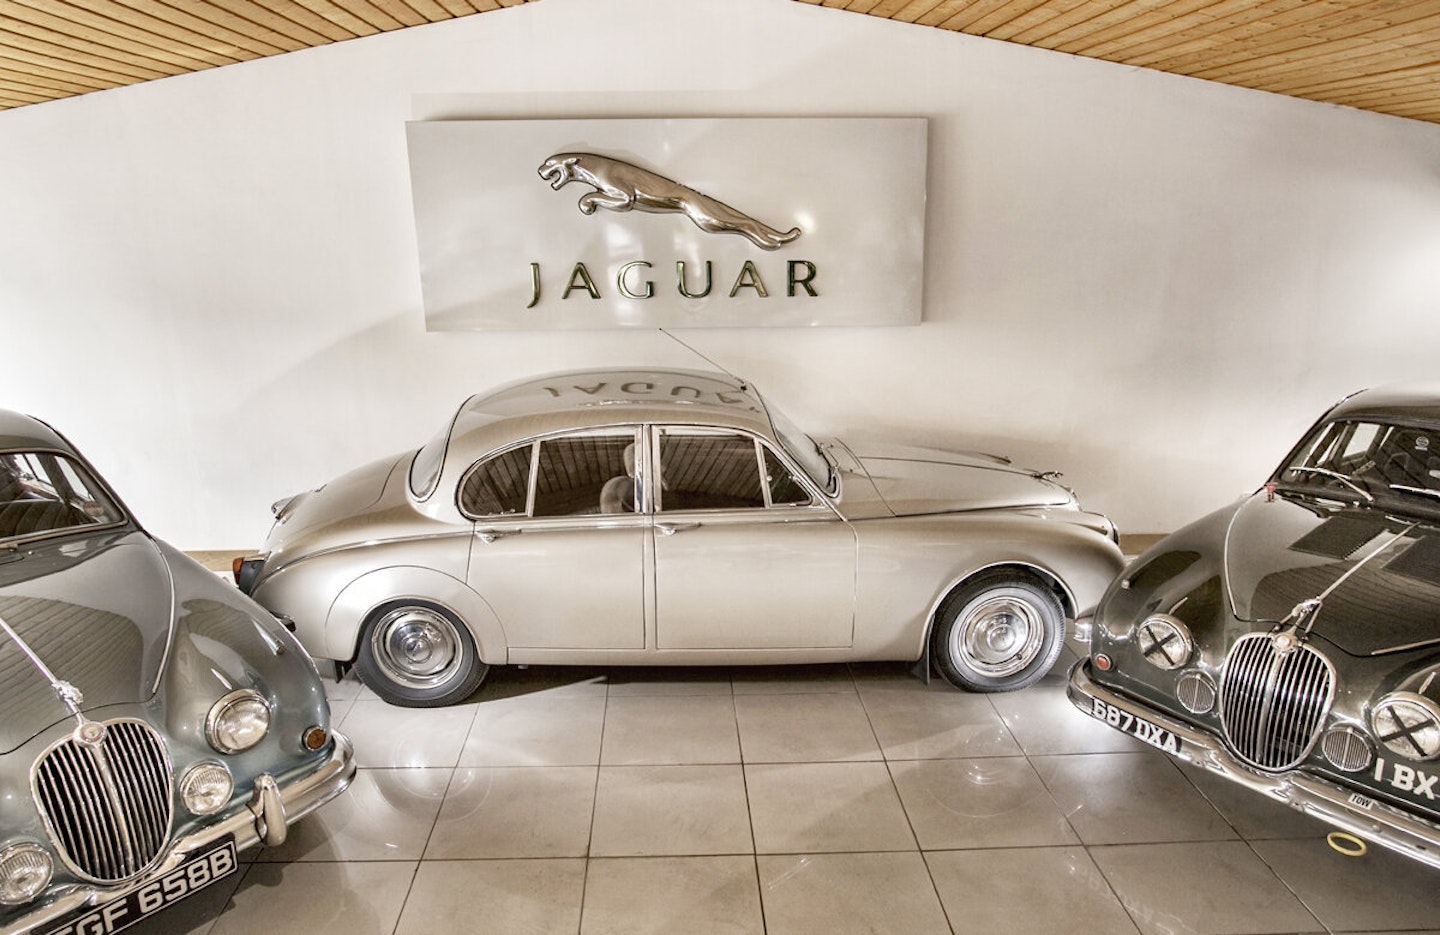 Michael’s car history started with a Jaguar Mk2 like this